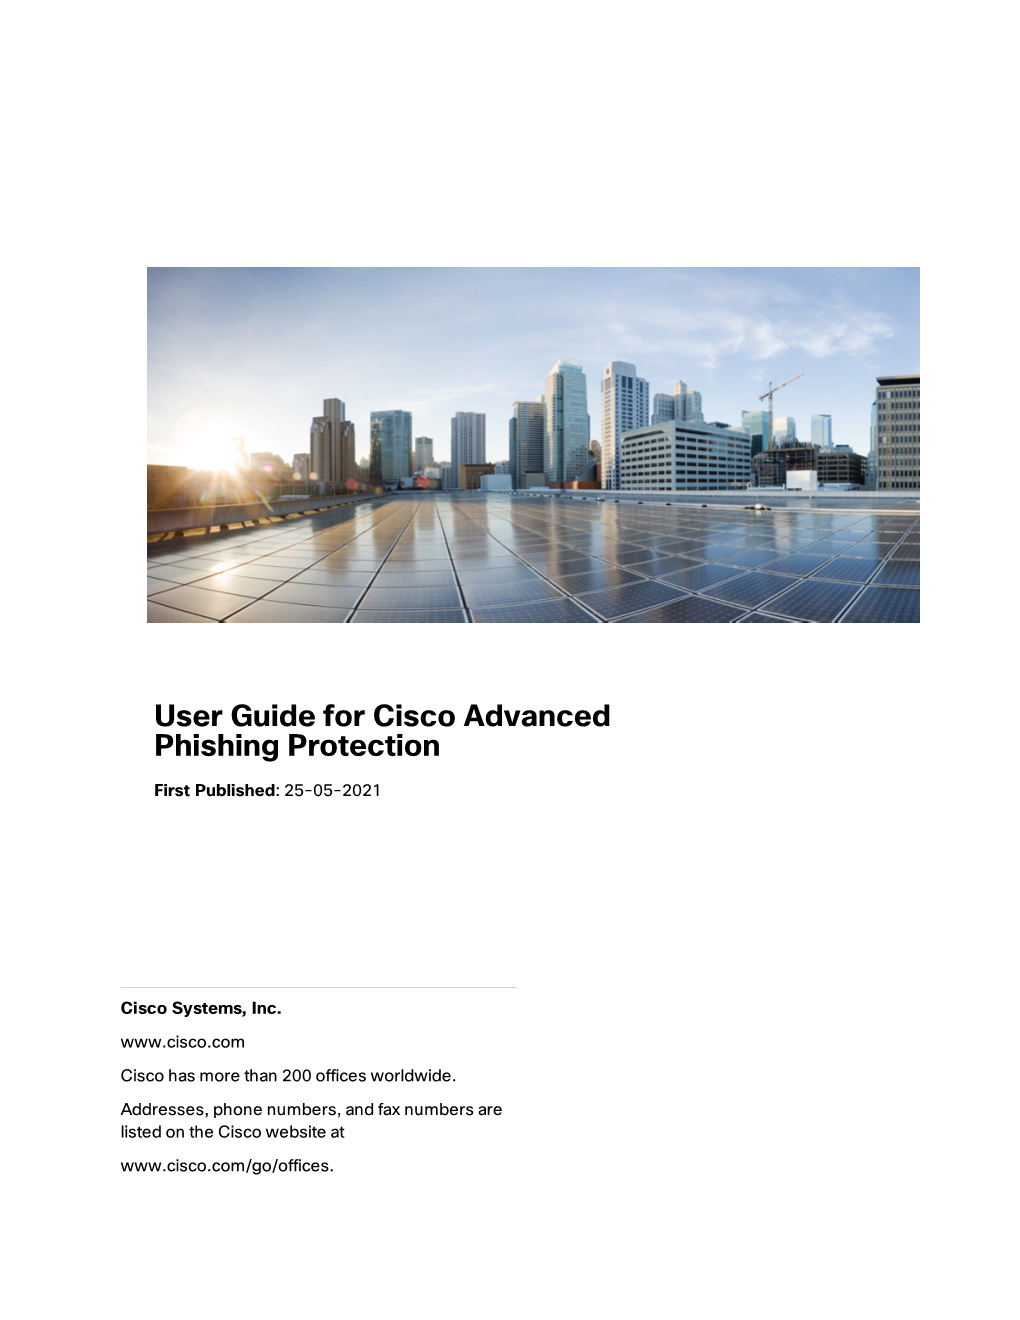 User Guide for Cisco Advanced Phishing Protection